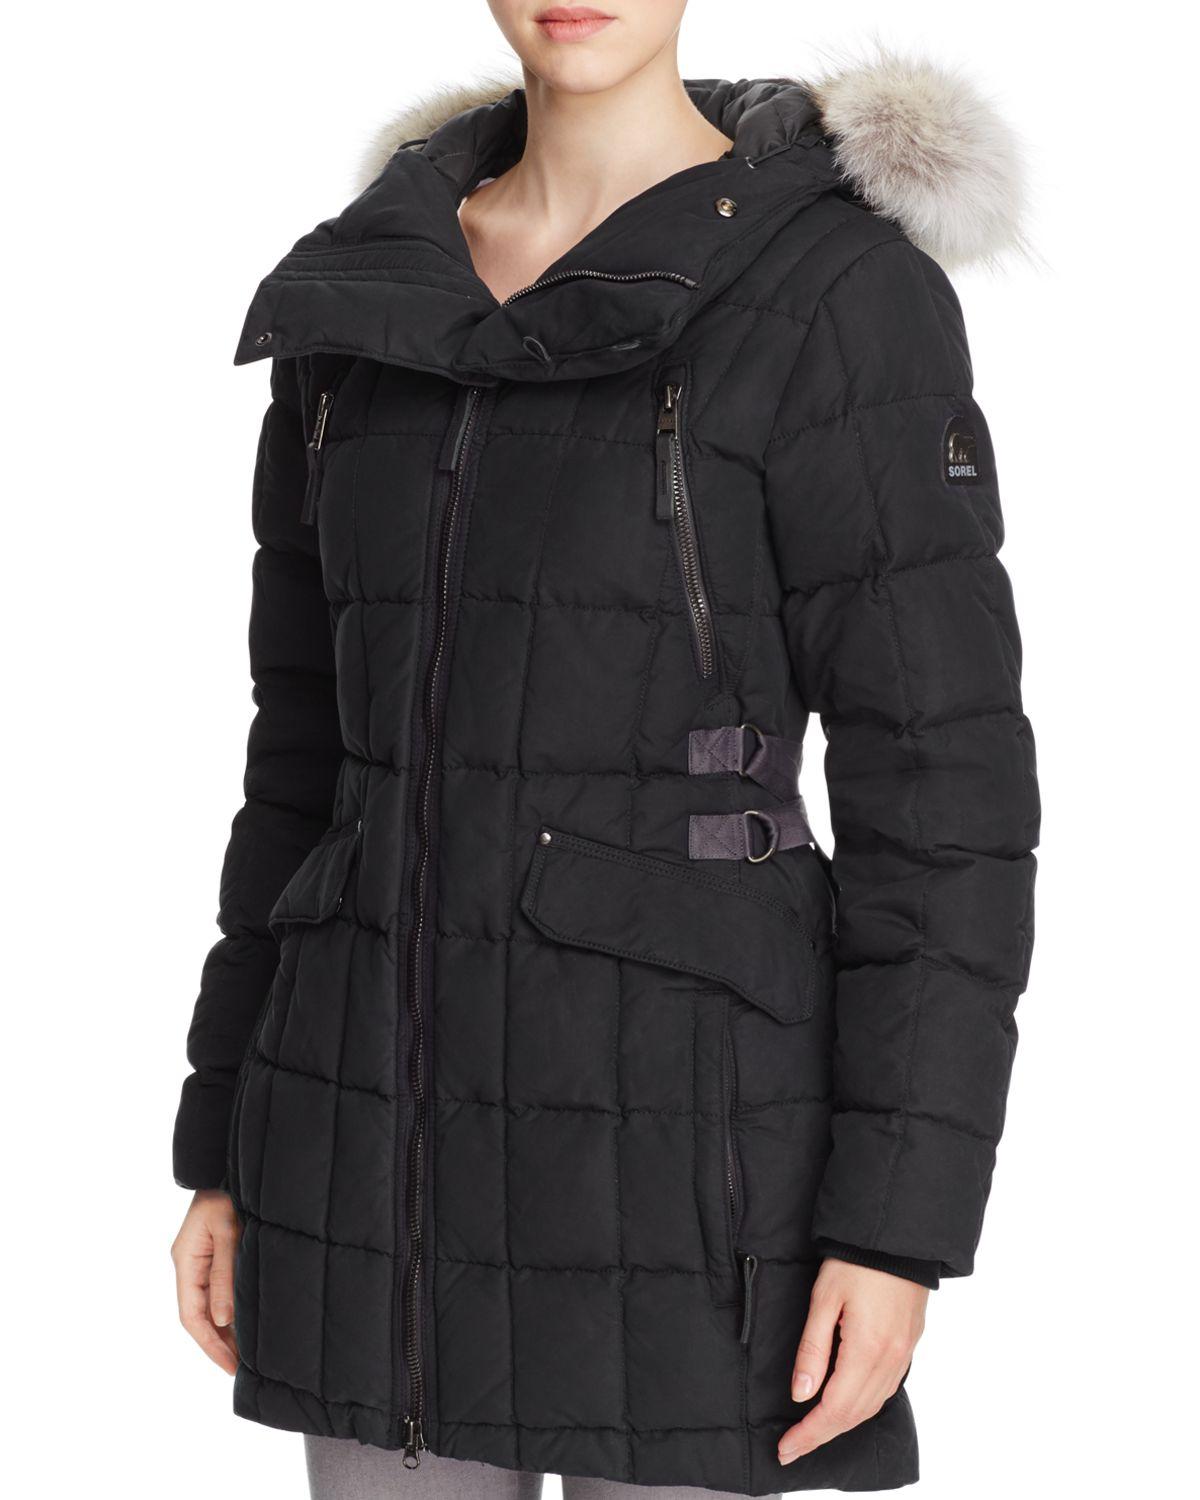 Sorel Cotton Conquest Carly Parka in Black - Lyst